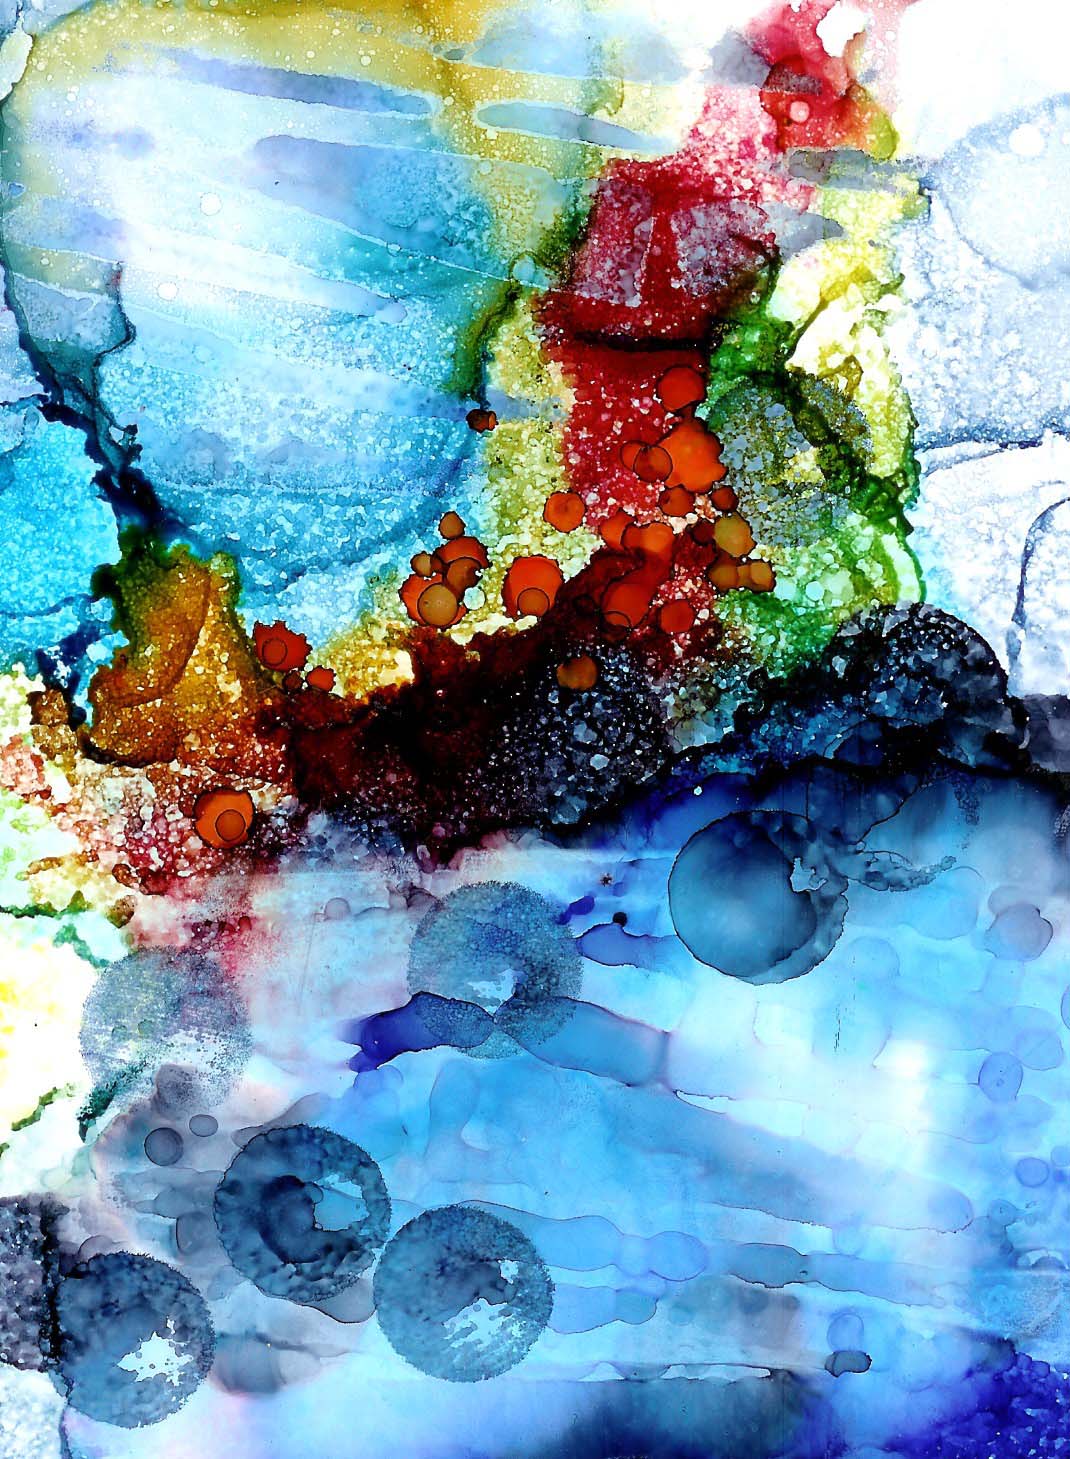 abstract art piece created using alcohol inks